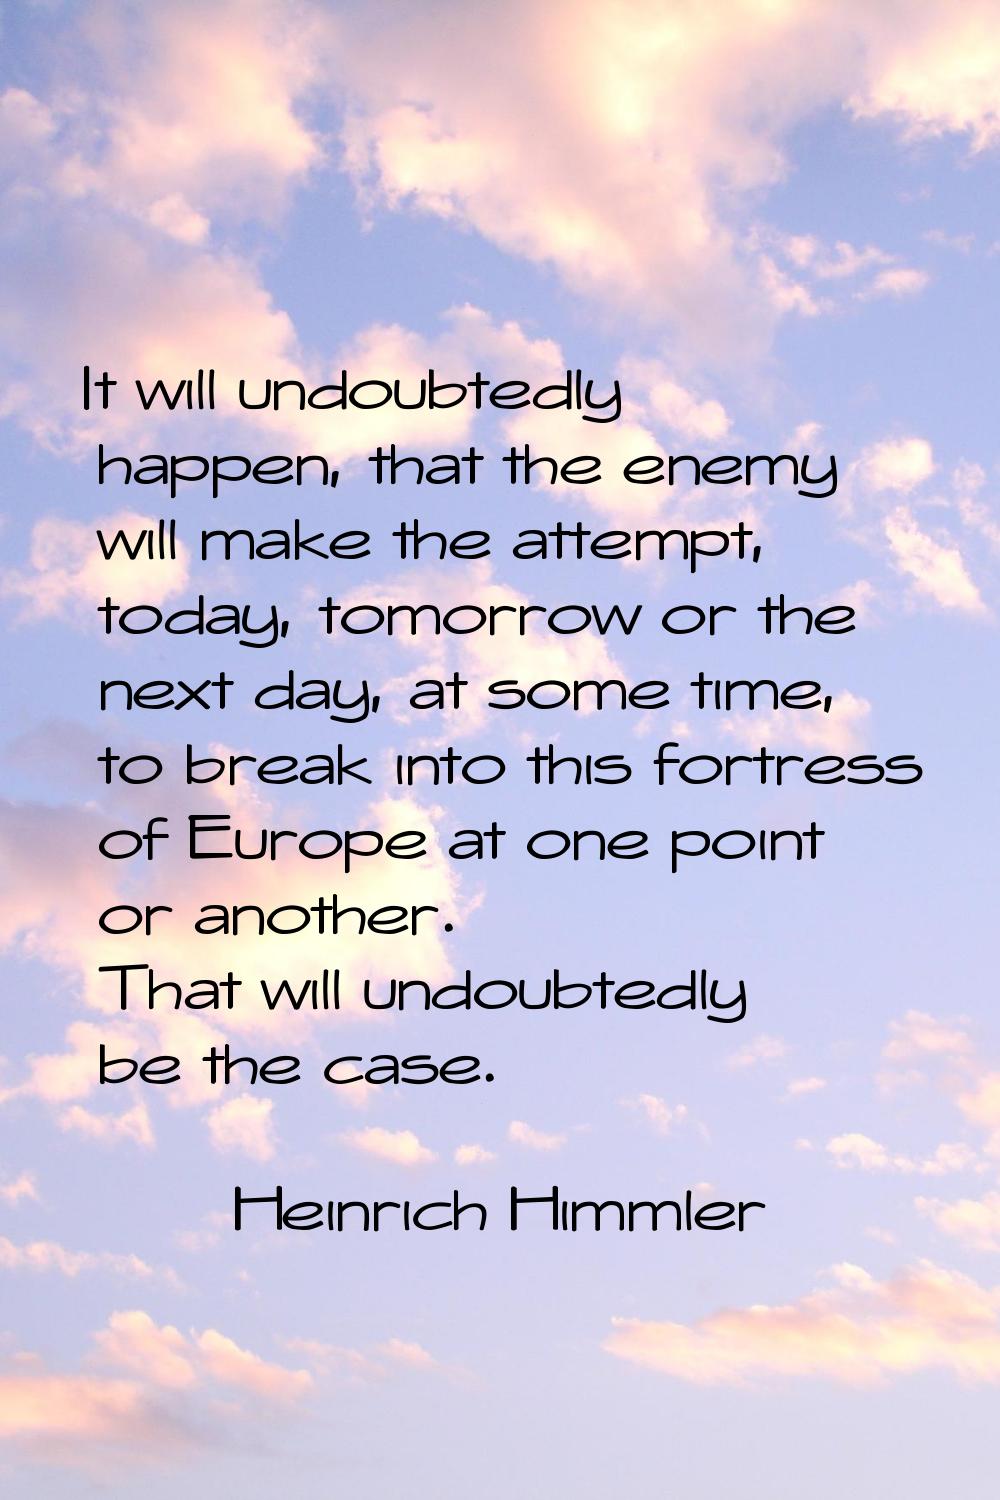 It will undoubtedly happen, that the enemy will make the attempt, today, tomorrow or the next day, 